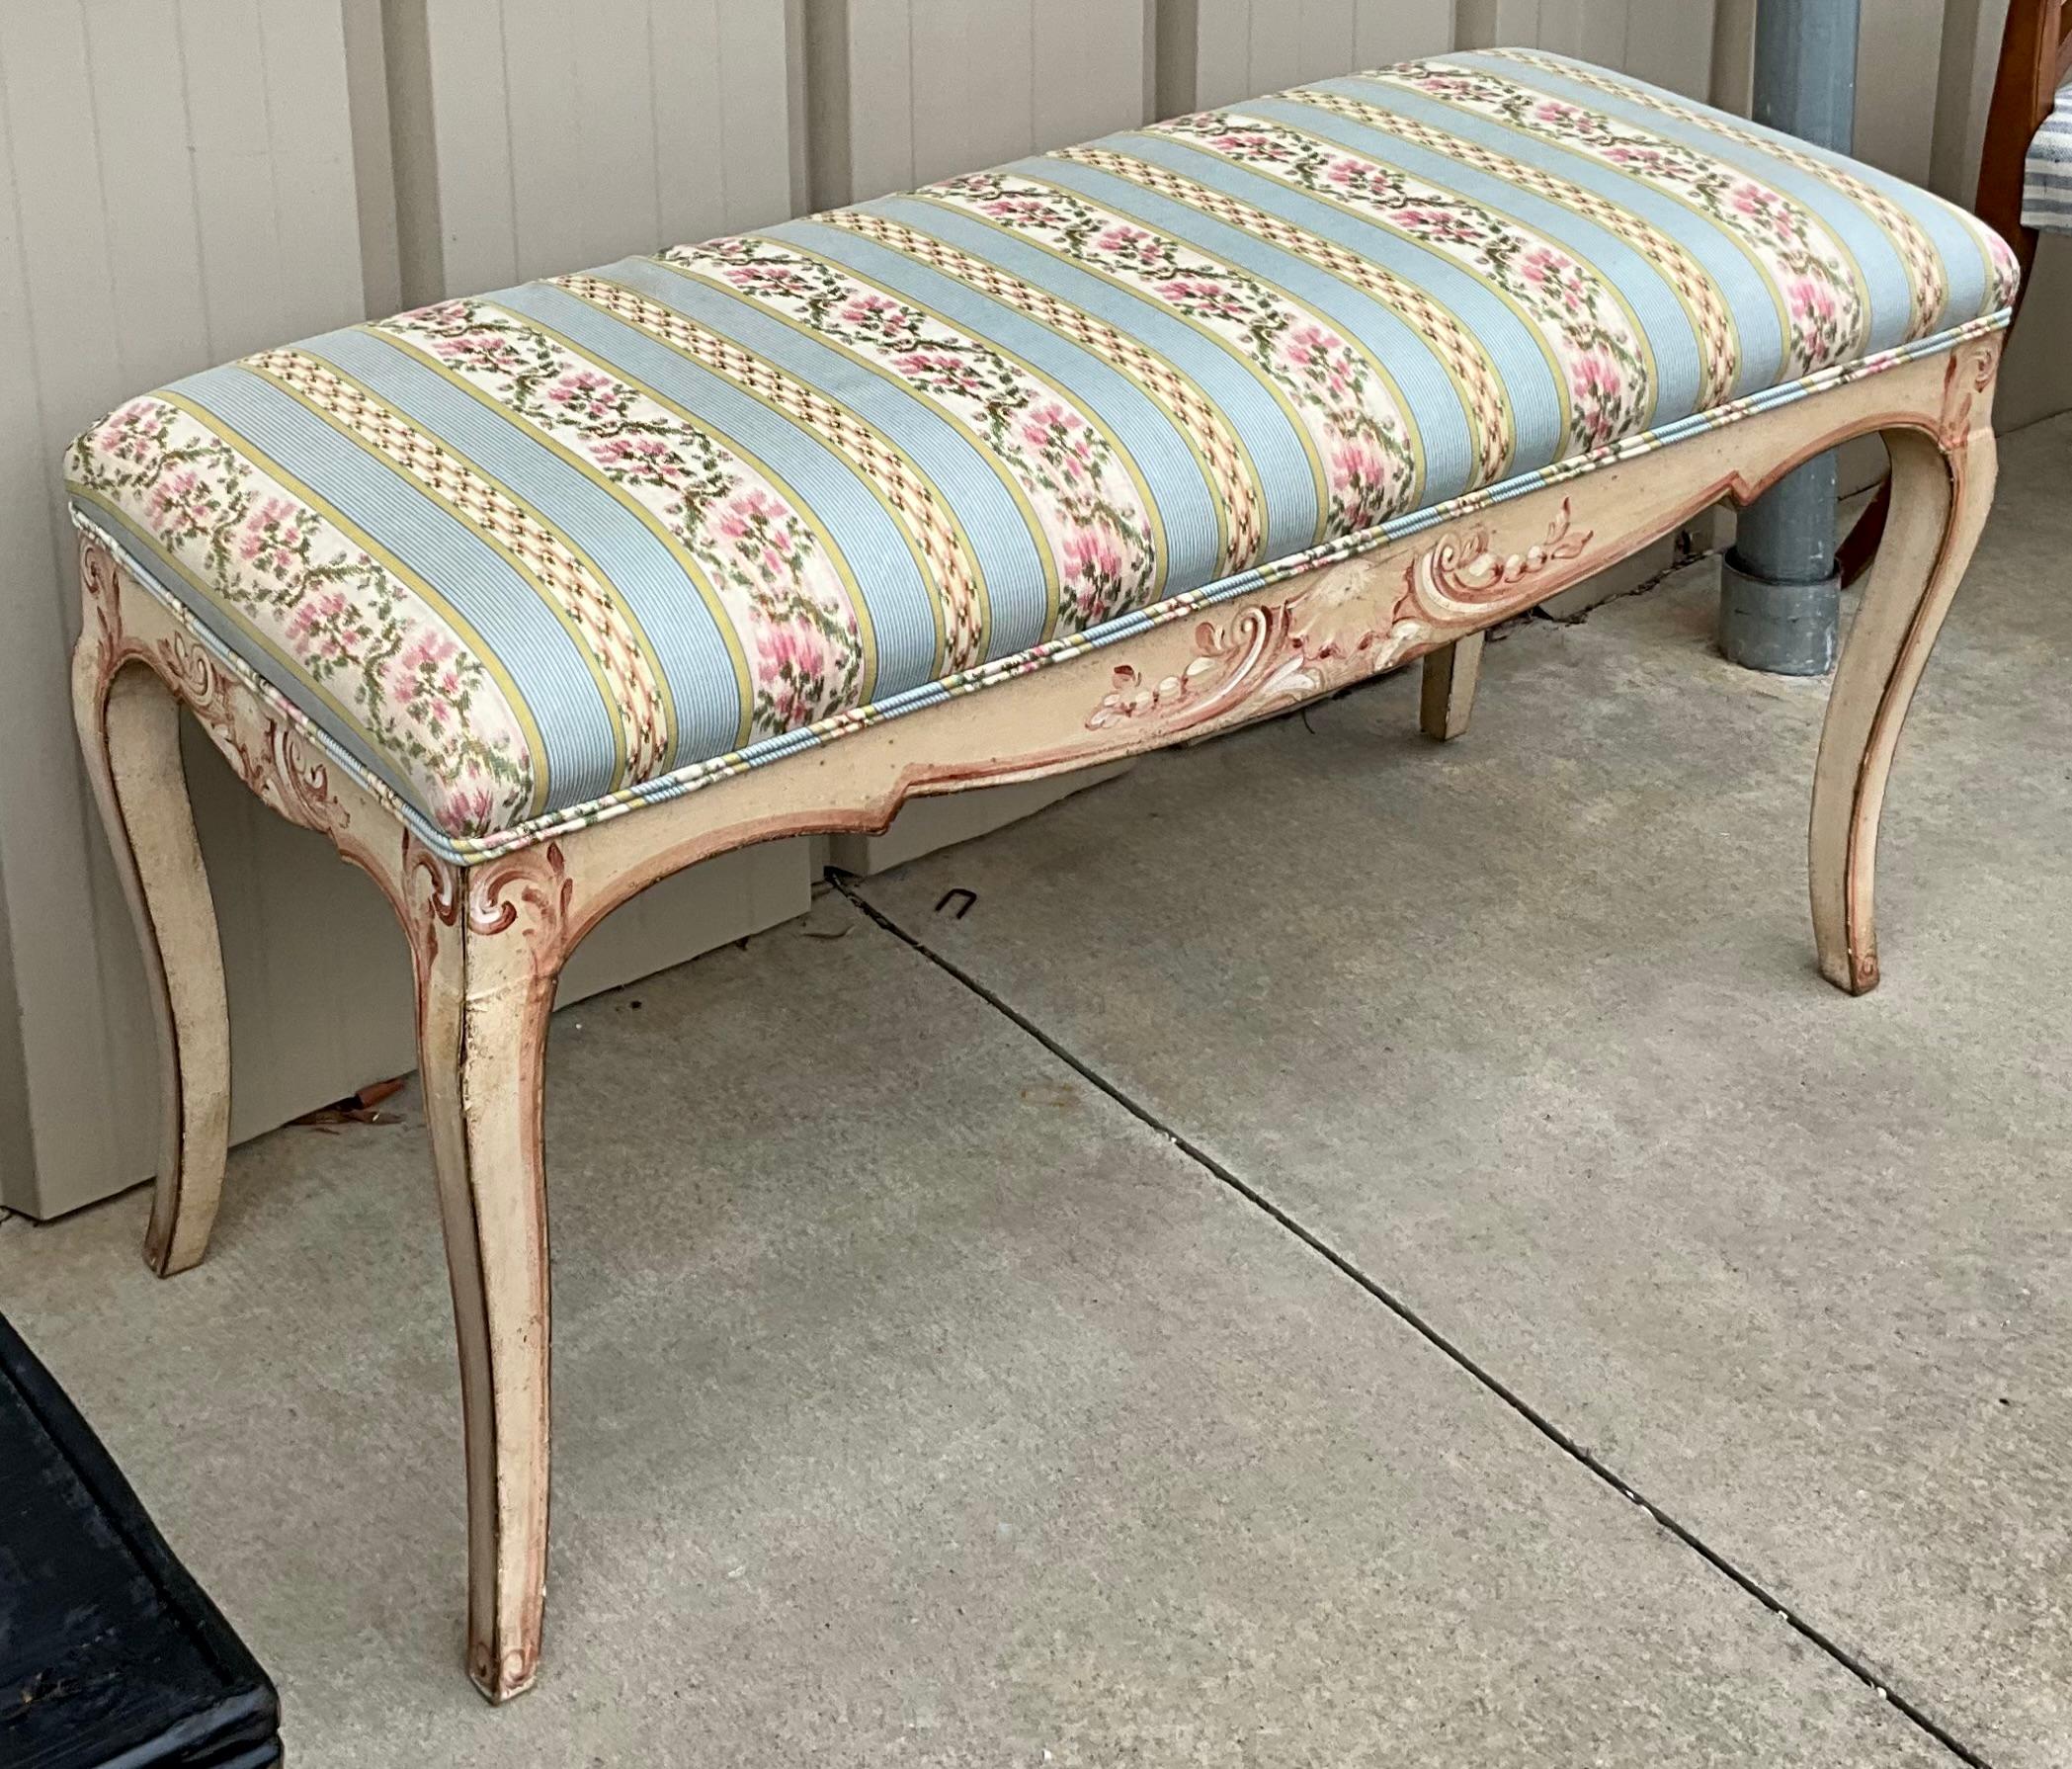 1960s Carved And Painted Italian Bench / Ottoman In Striped Floral Chintz  For Sale 3